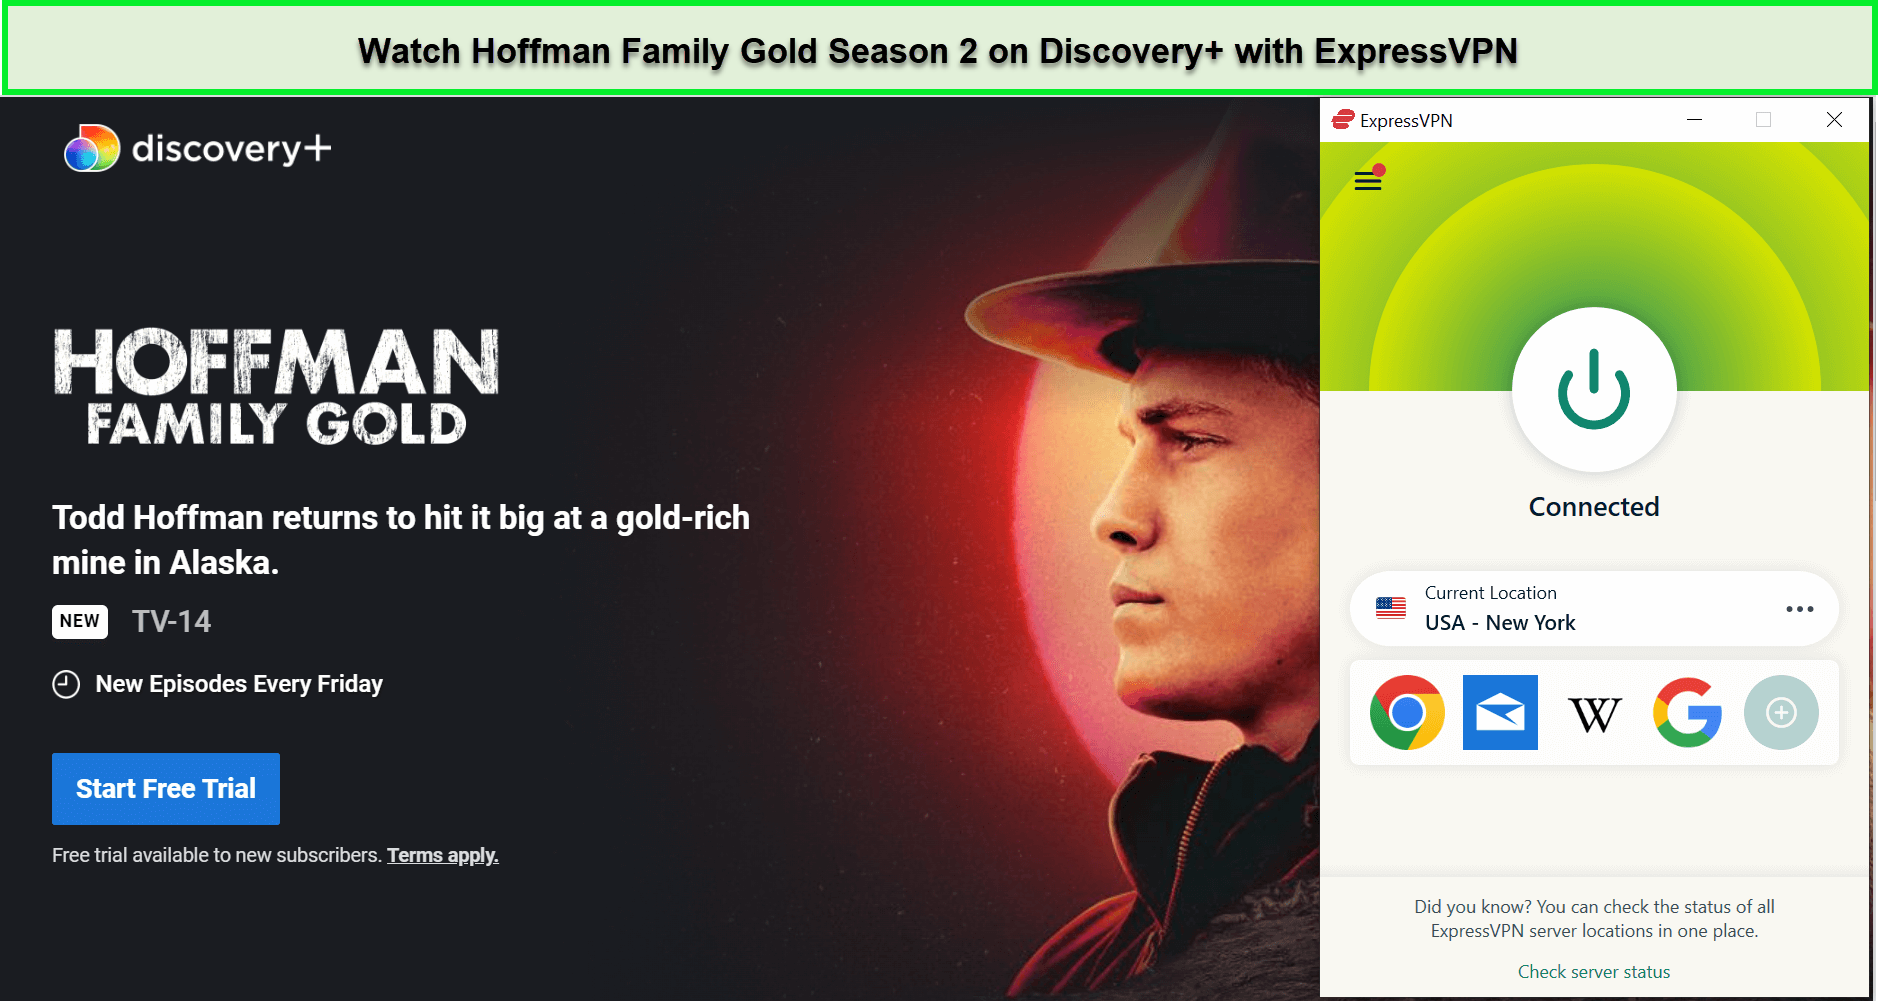 Watch-Hoffman-Family-Gold-Season-2-in-es-on-Discovery-with-ExpressVPN.